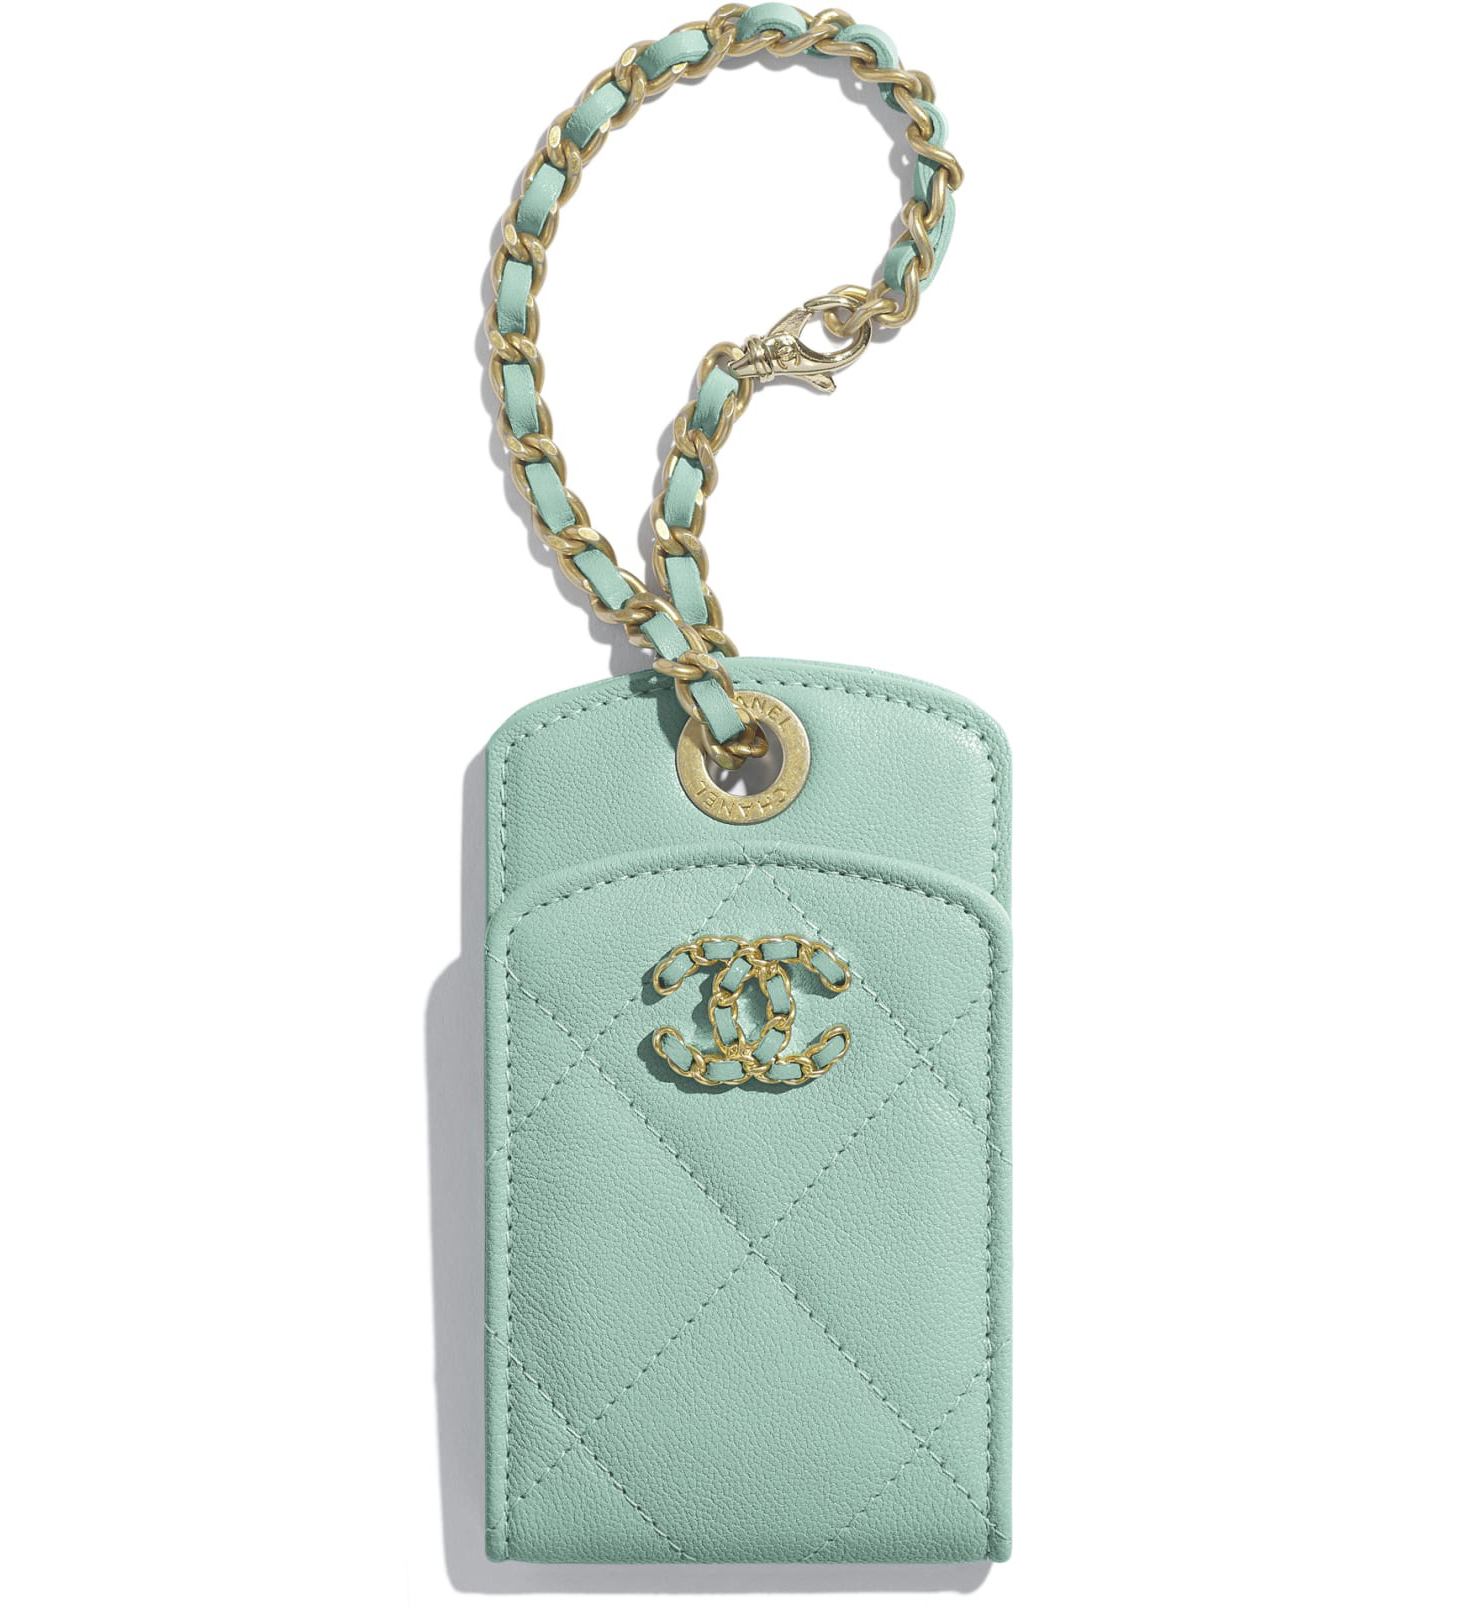 Chanel Luggage Tags